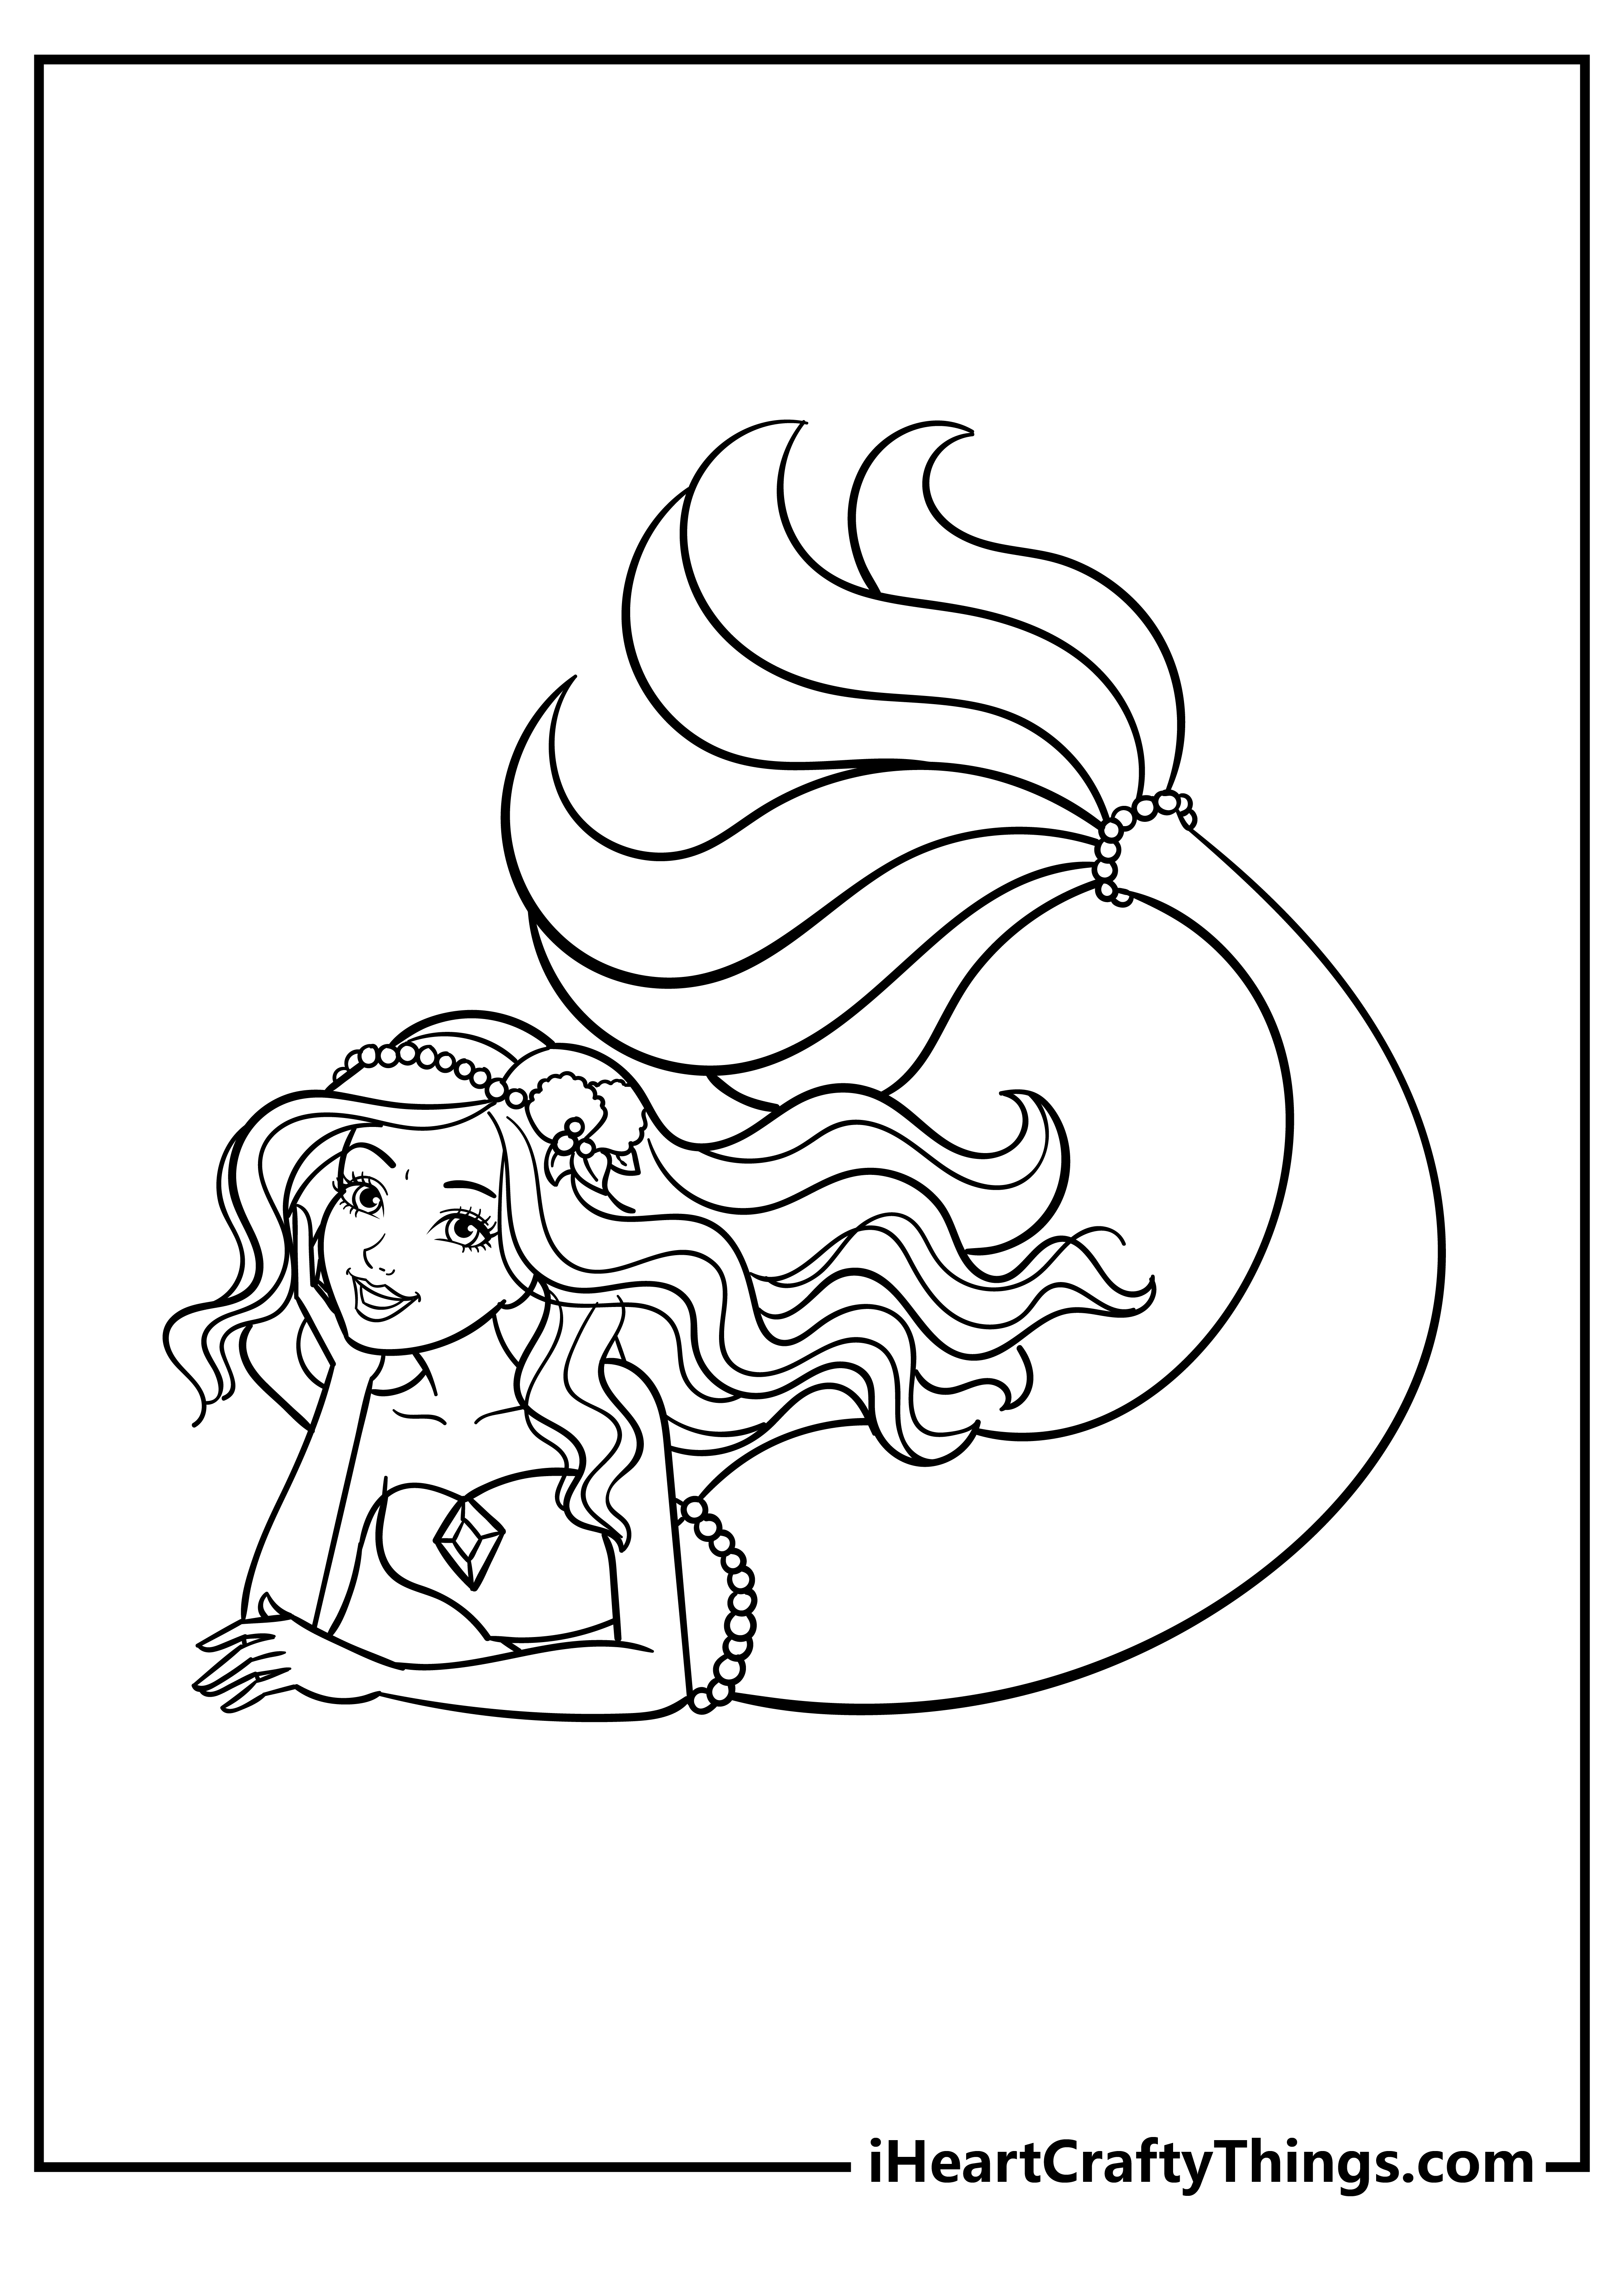 Barbie Mermaid Coloring Book for adults free download